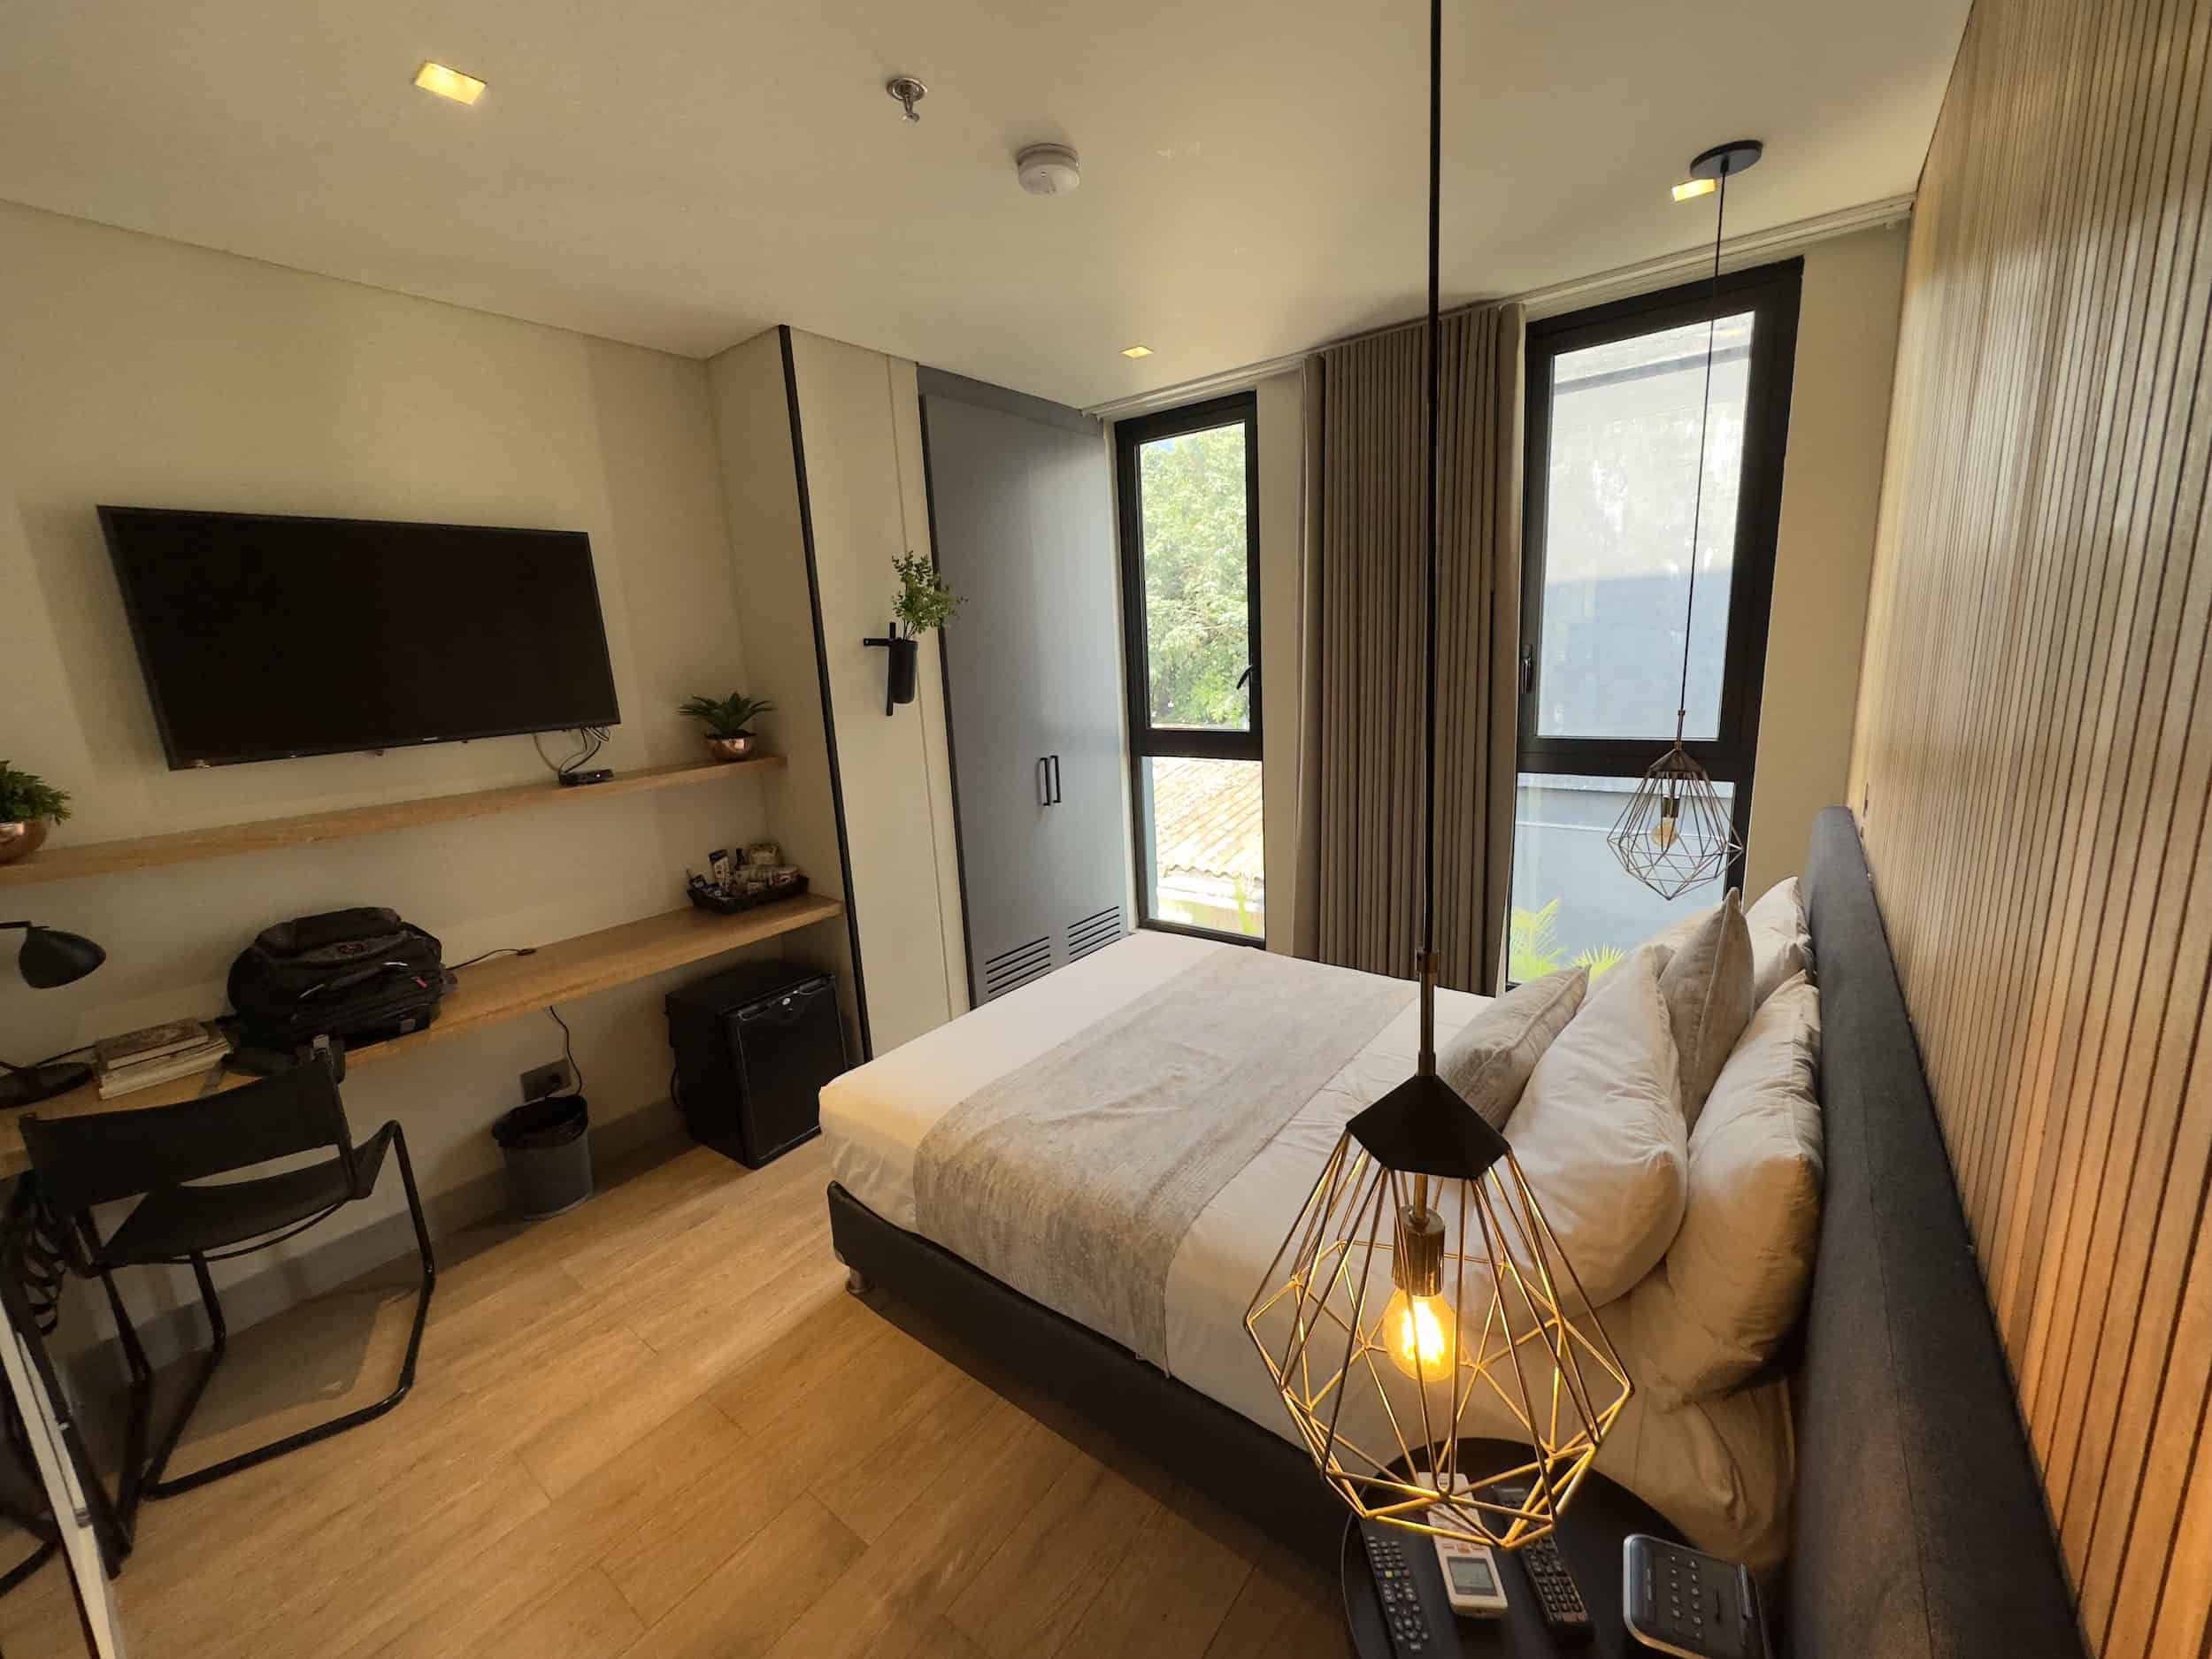 Room at 14 Urban Hotel in Provenza, Medellín, Colombia